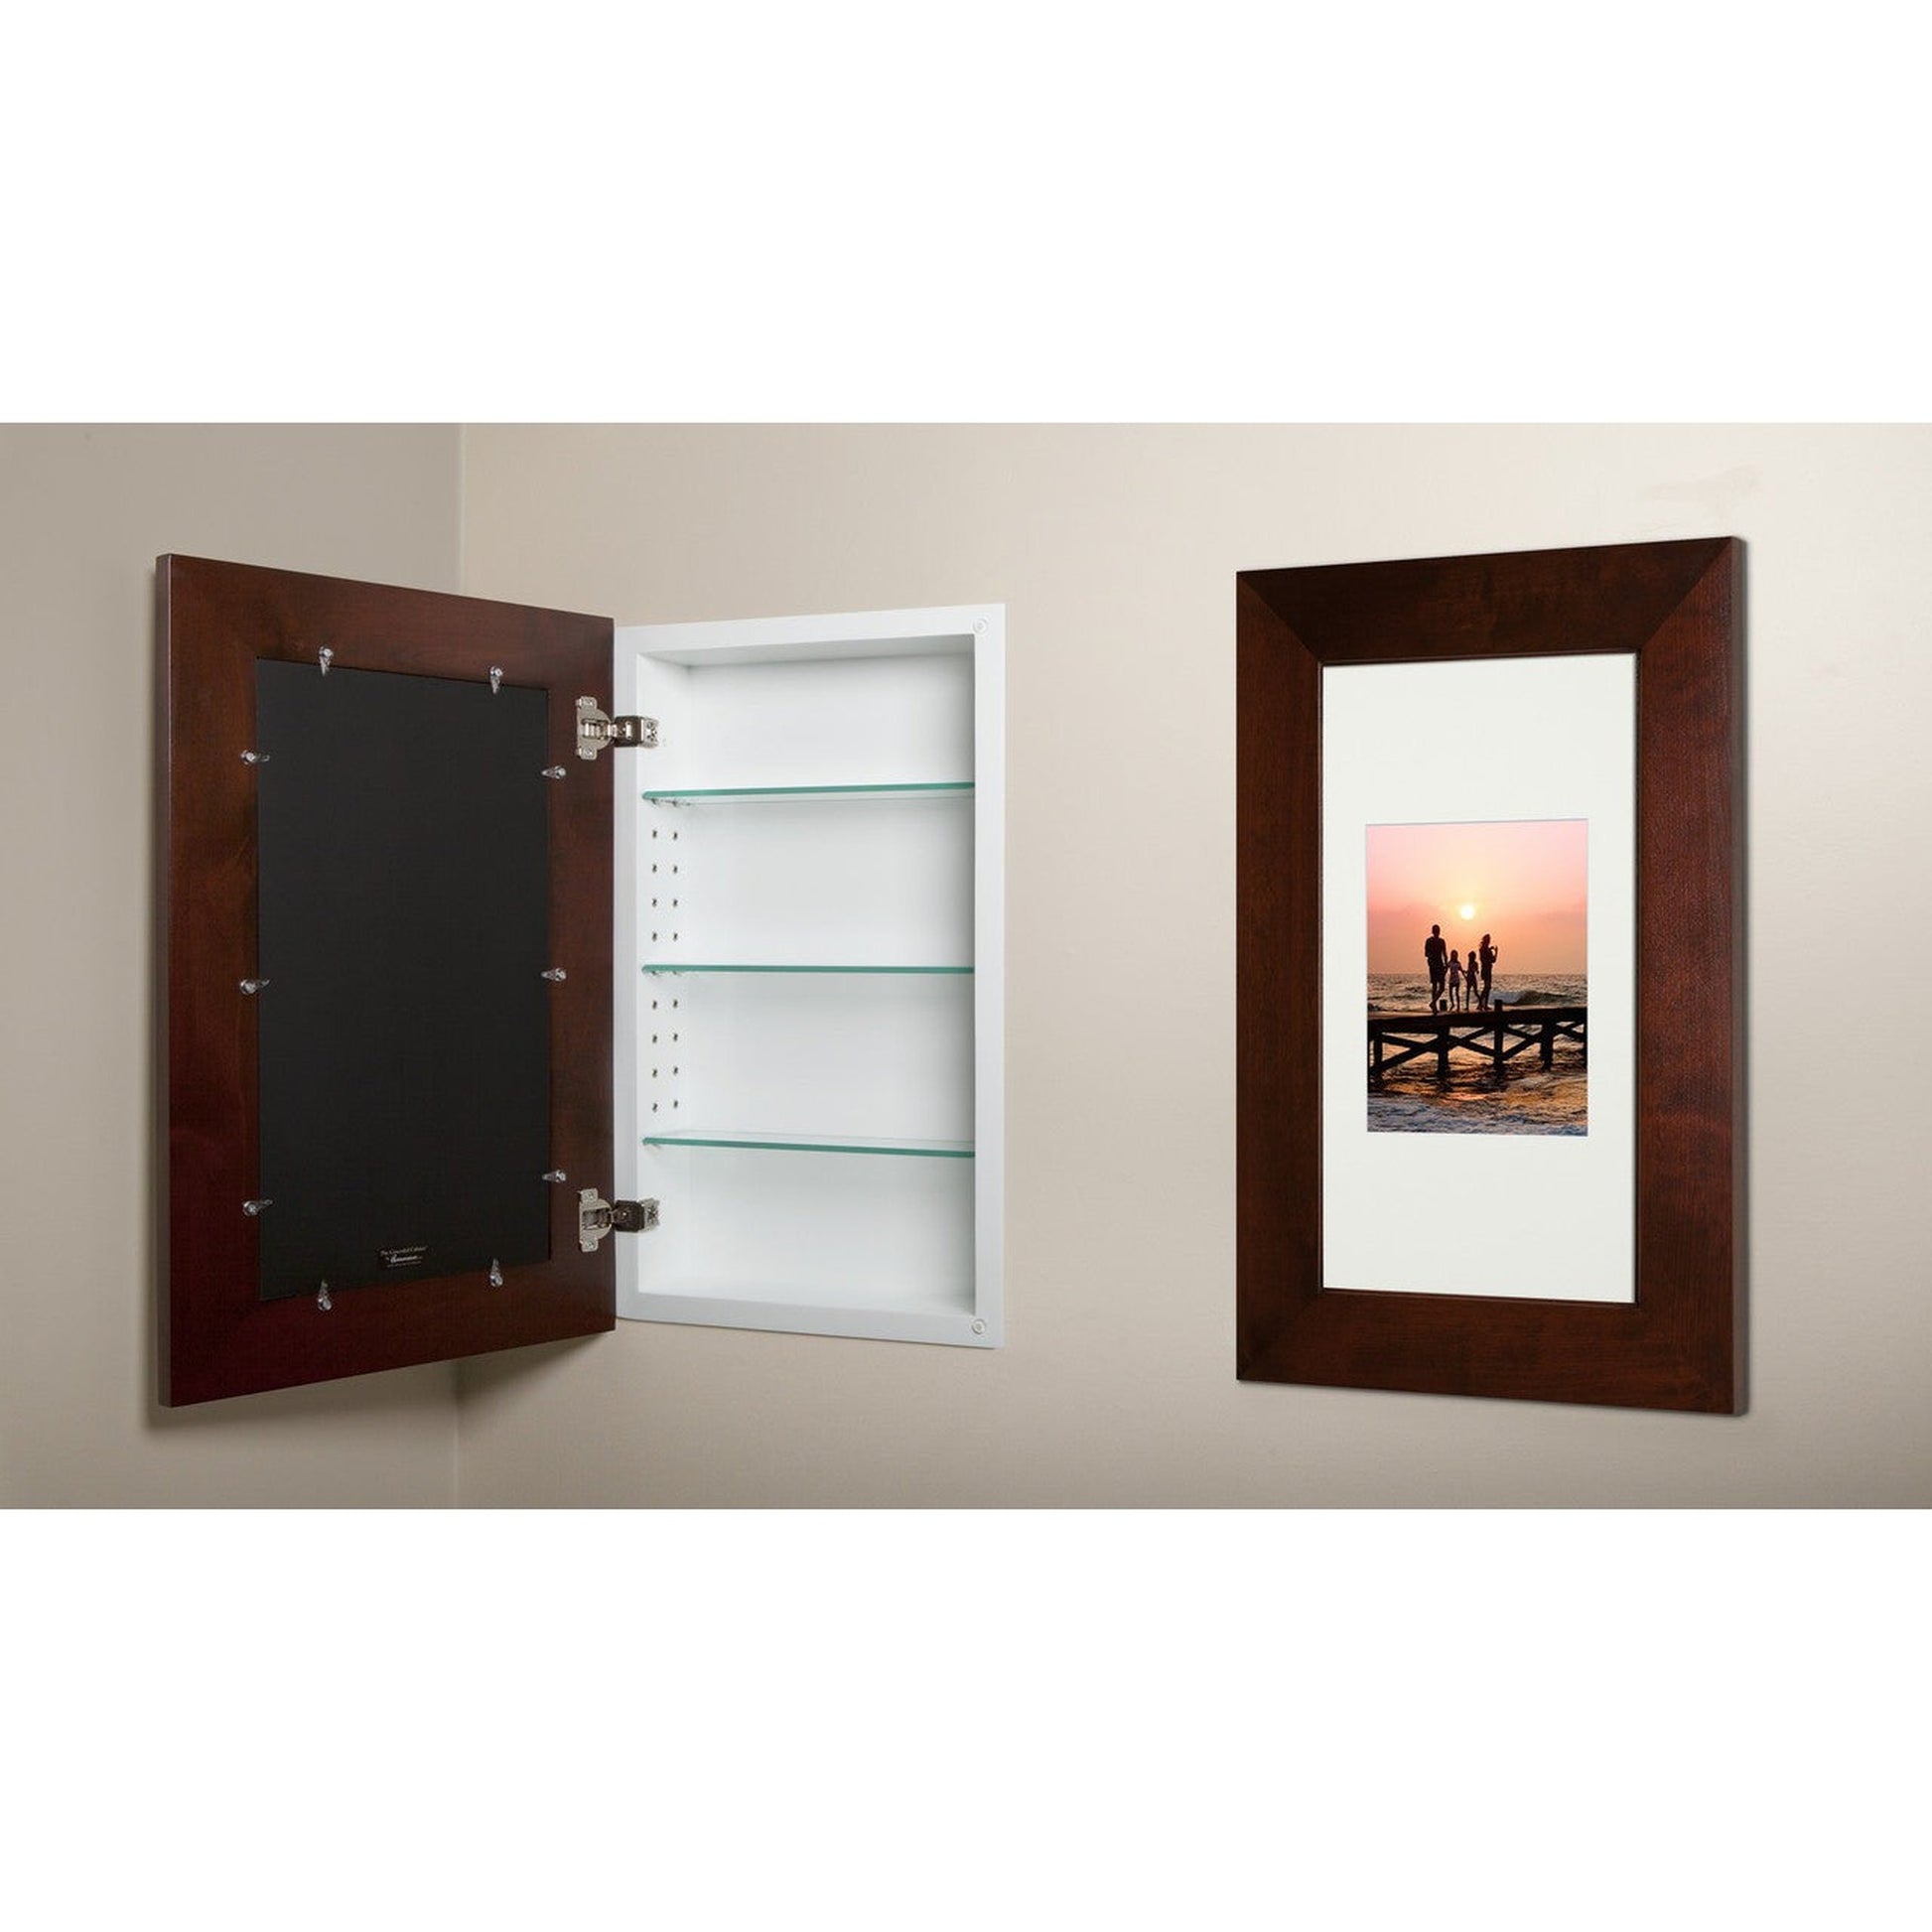 Fox Hollow Furnishings 14" x 24" Espresso Extra Large Standard 3.75" Depth White Interior Recessed Picture Frame Medicine Cabinet With White Three Opening Matting